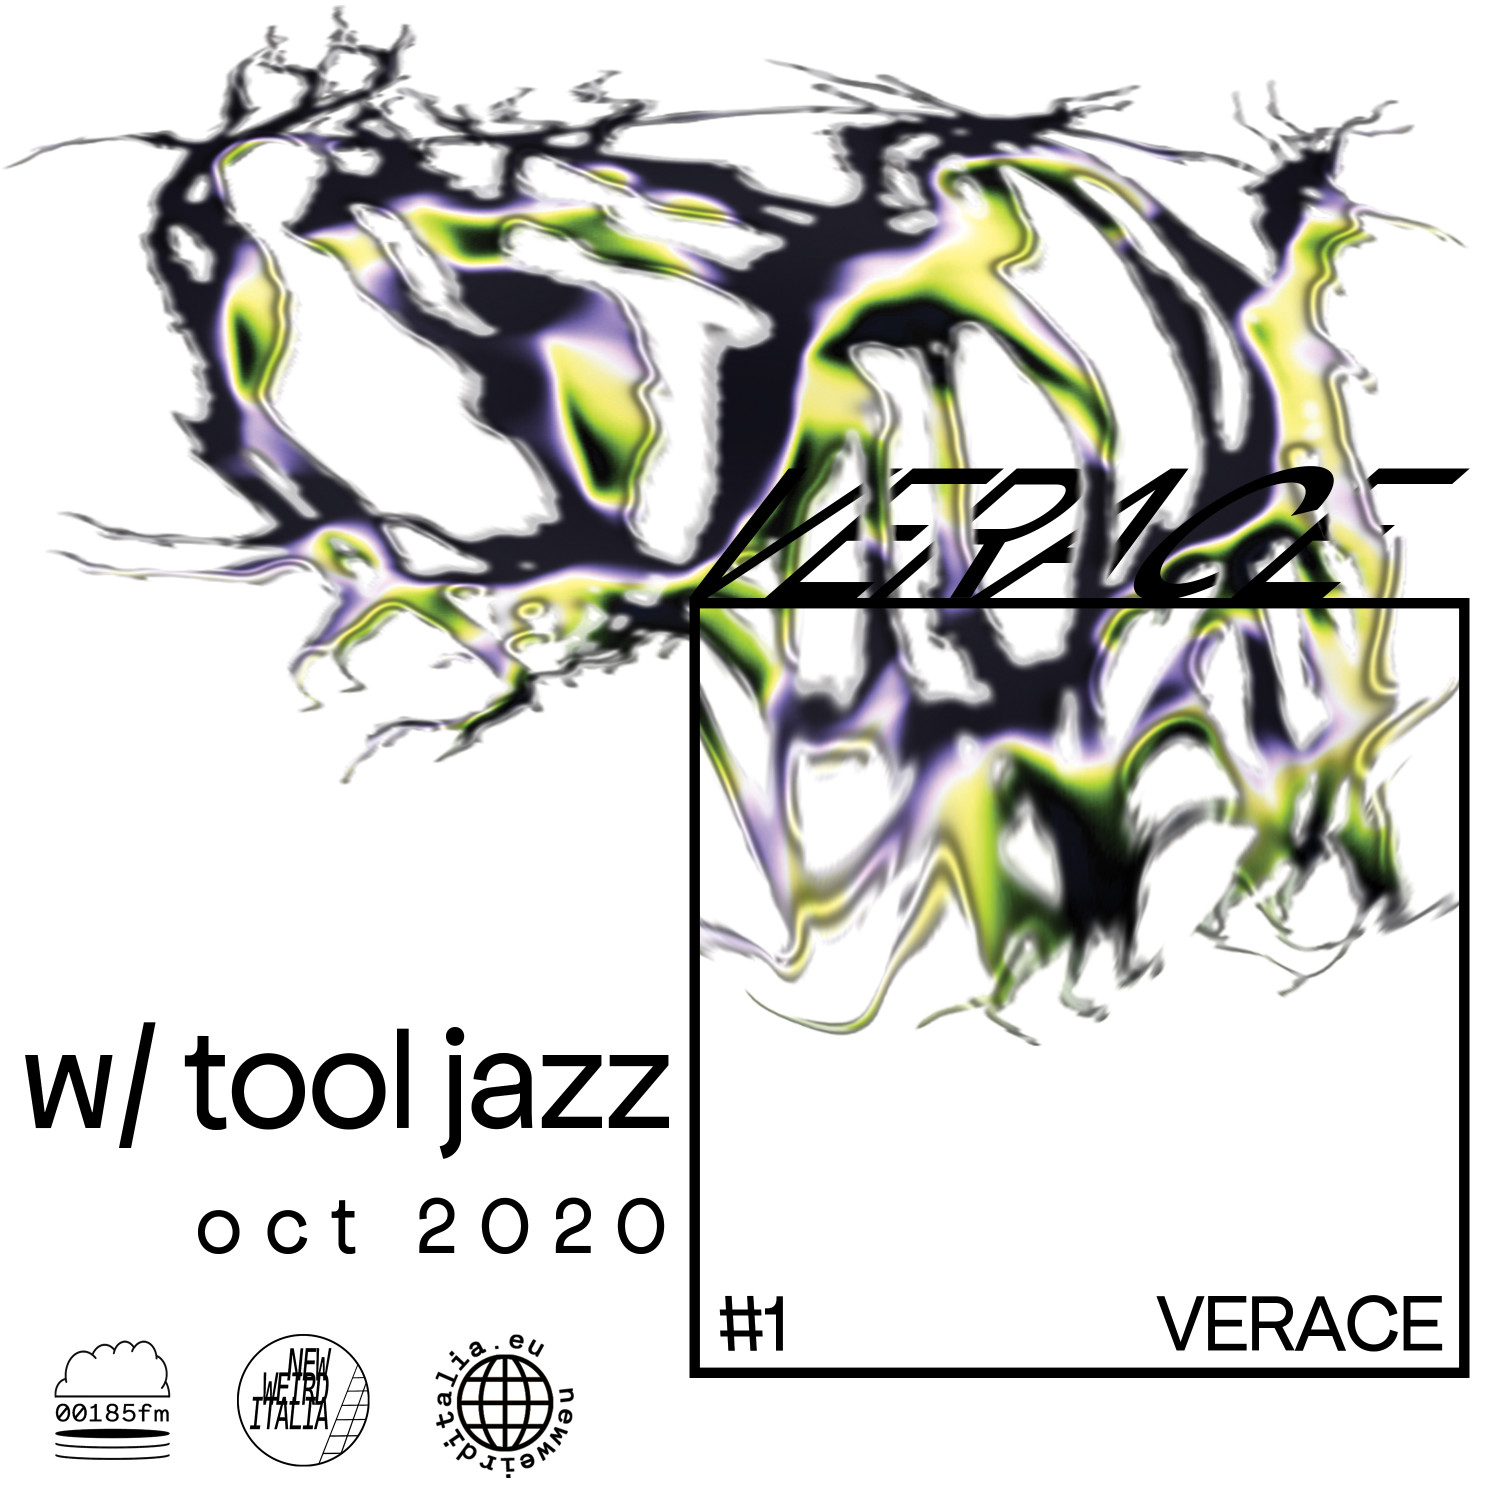 #1 "I don't care" by Tool JazzGuests